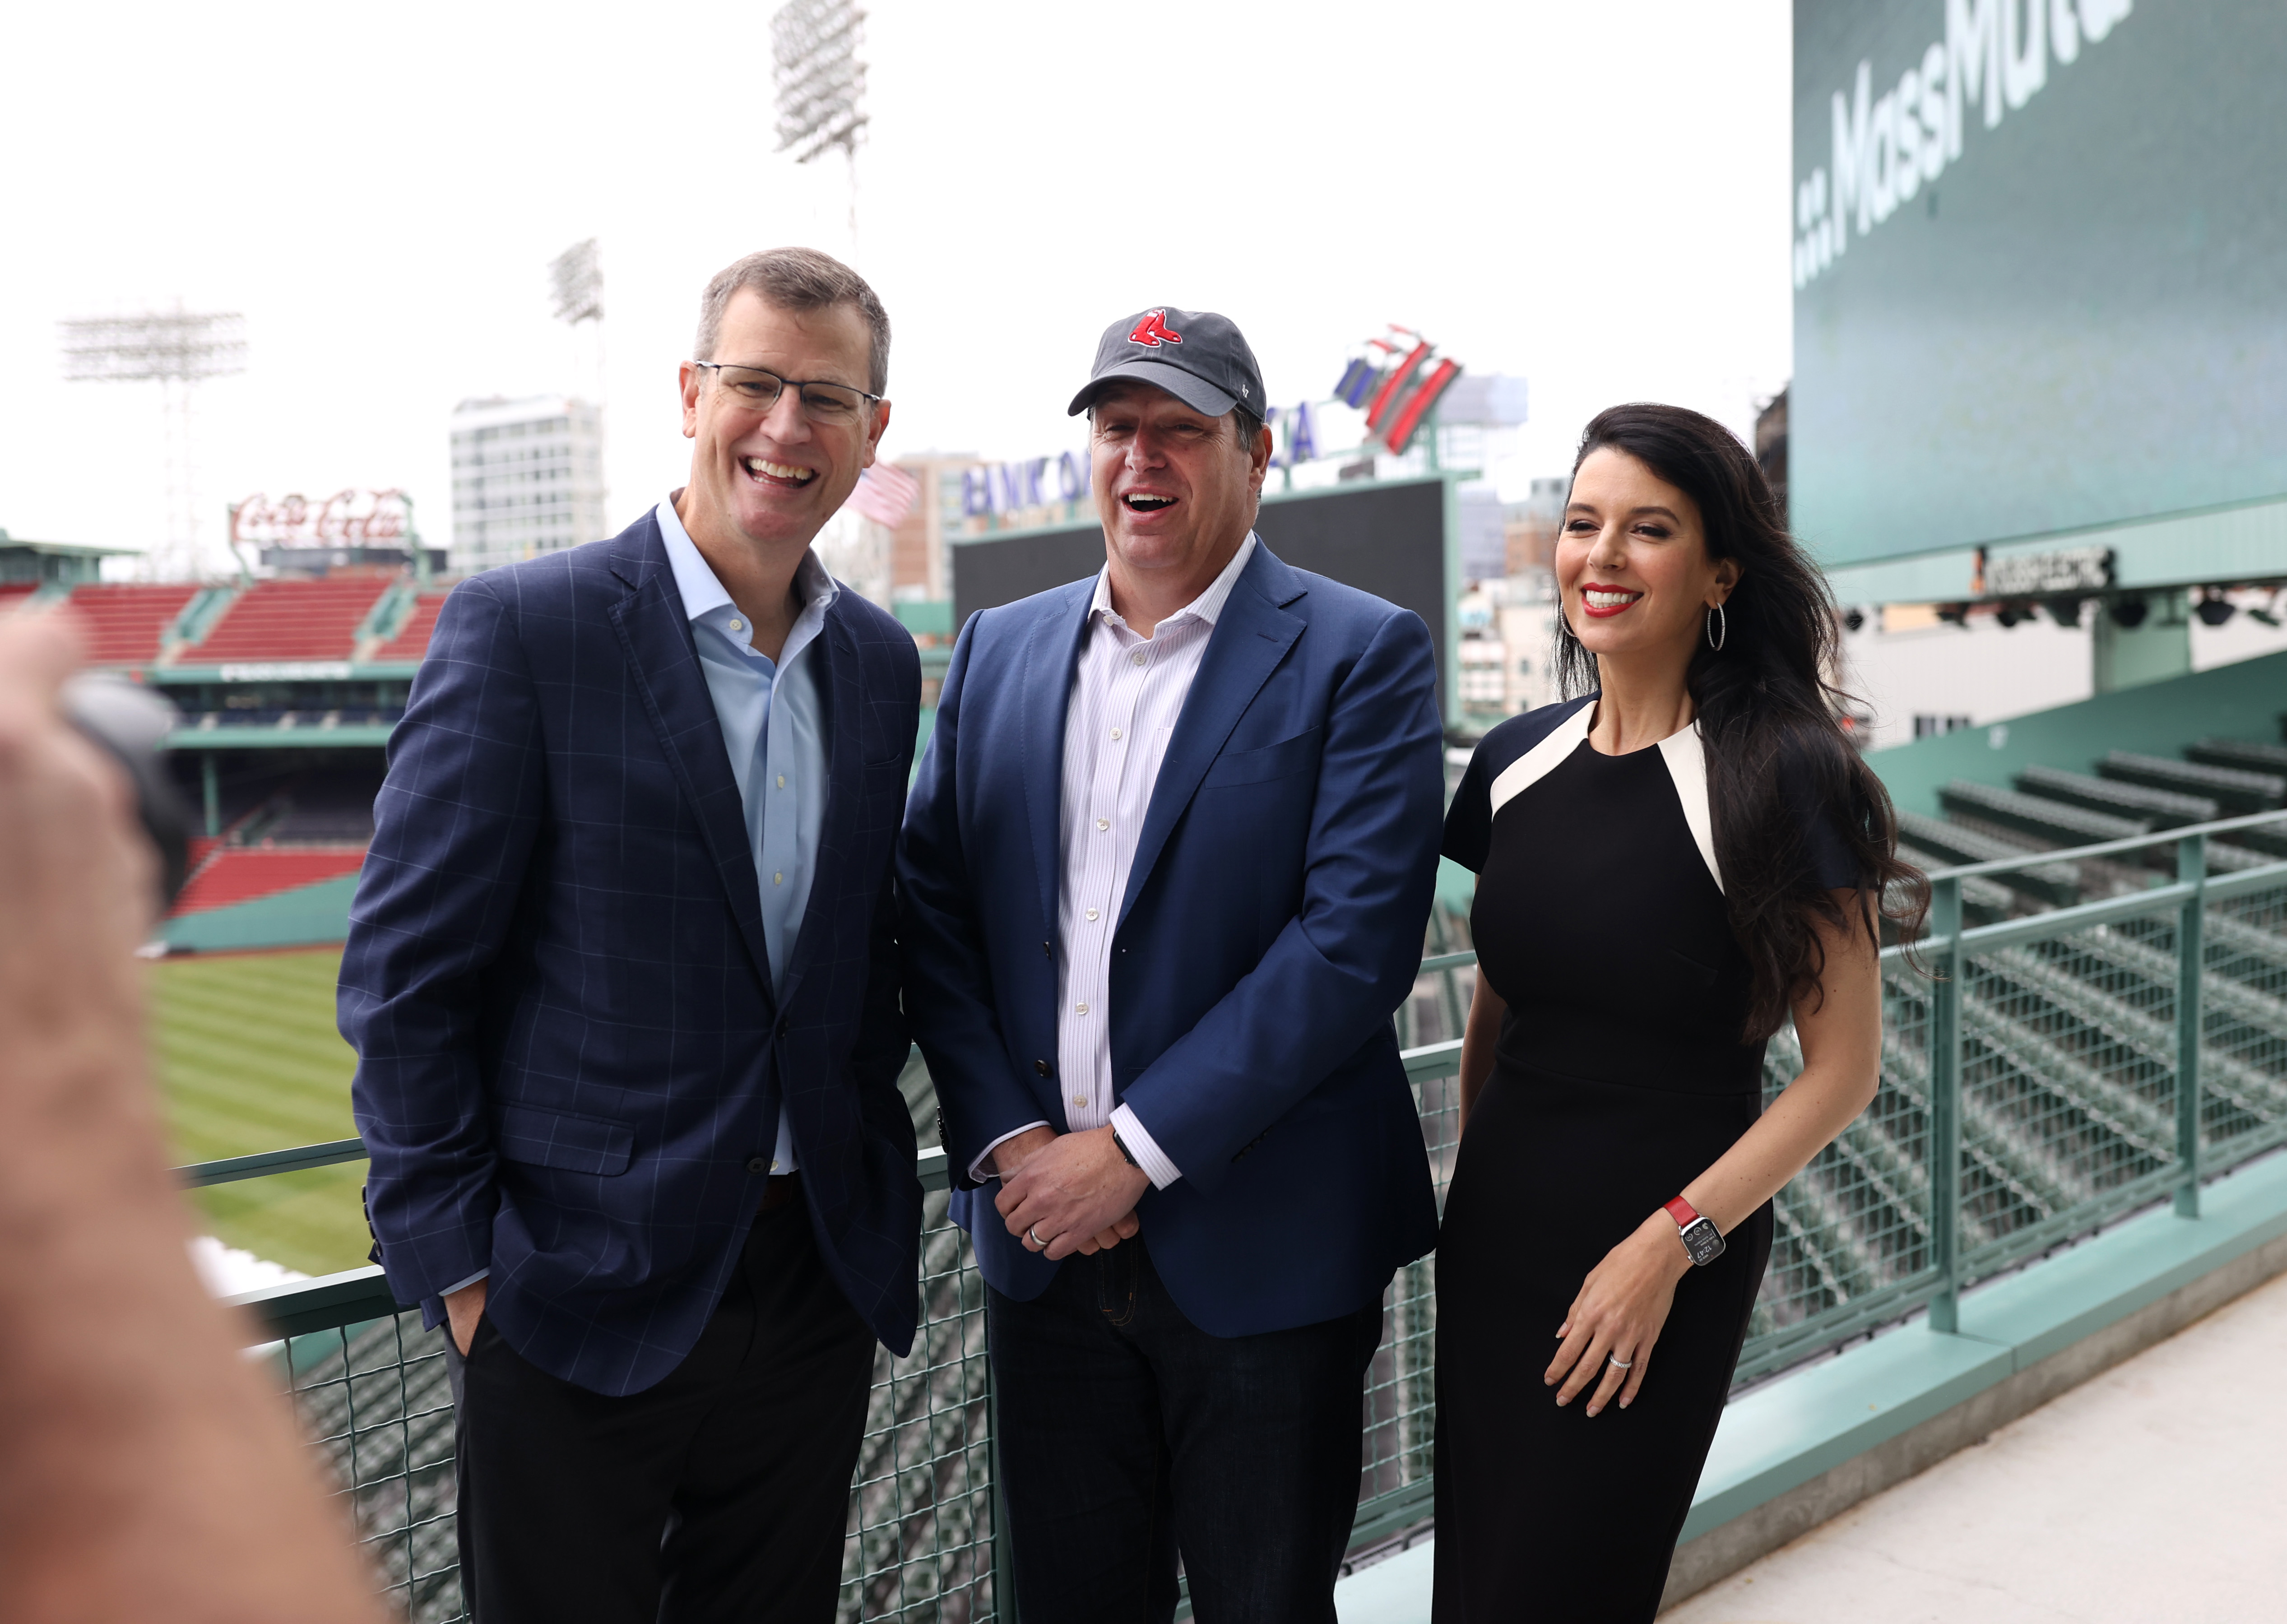 MassMutual lands deal for patch on Red Sox uniforms; Springfield